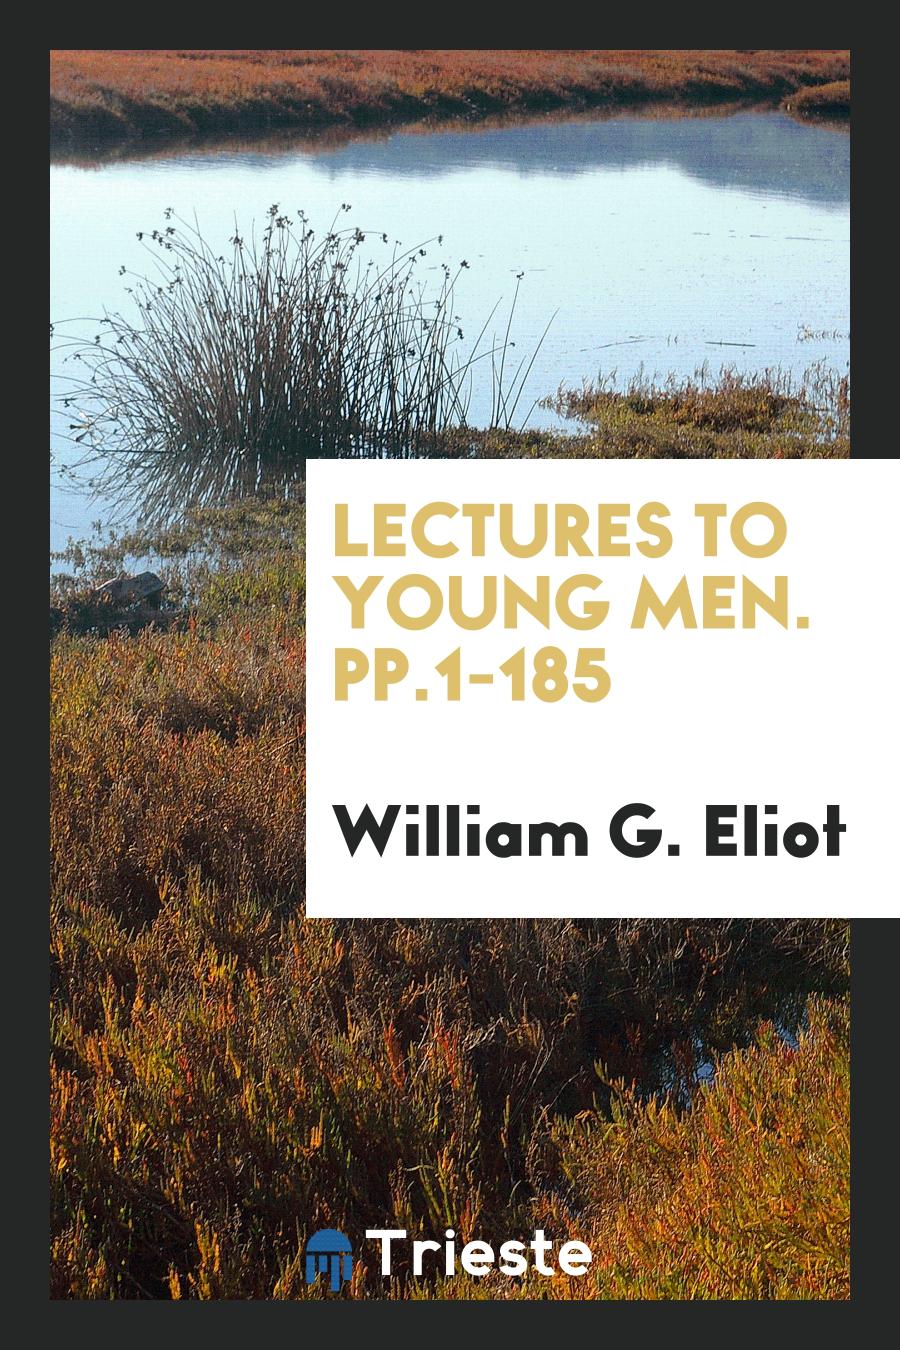 Lectures to Young Men. pp.1-185